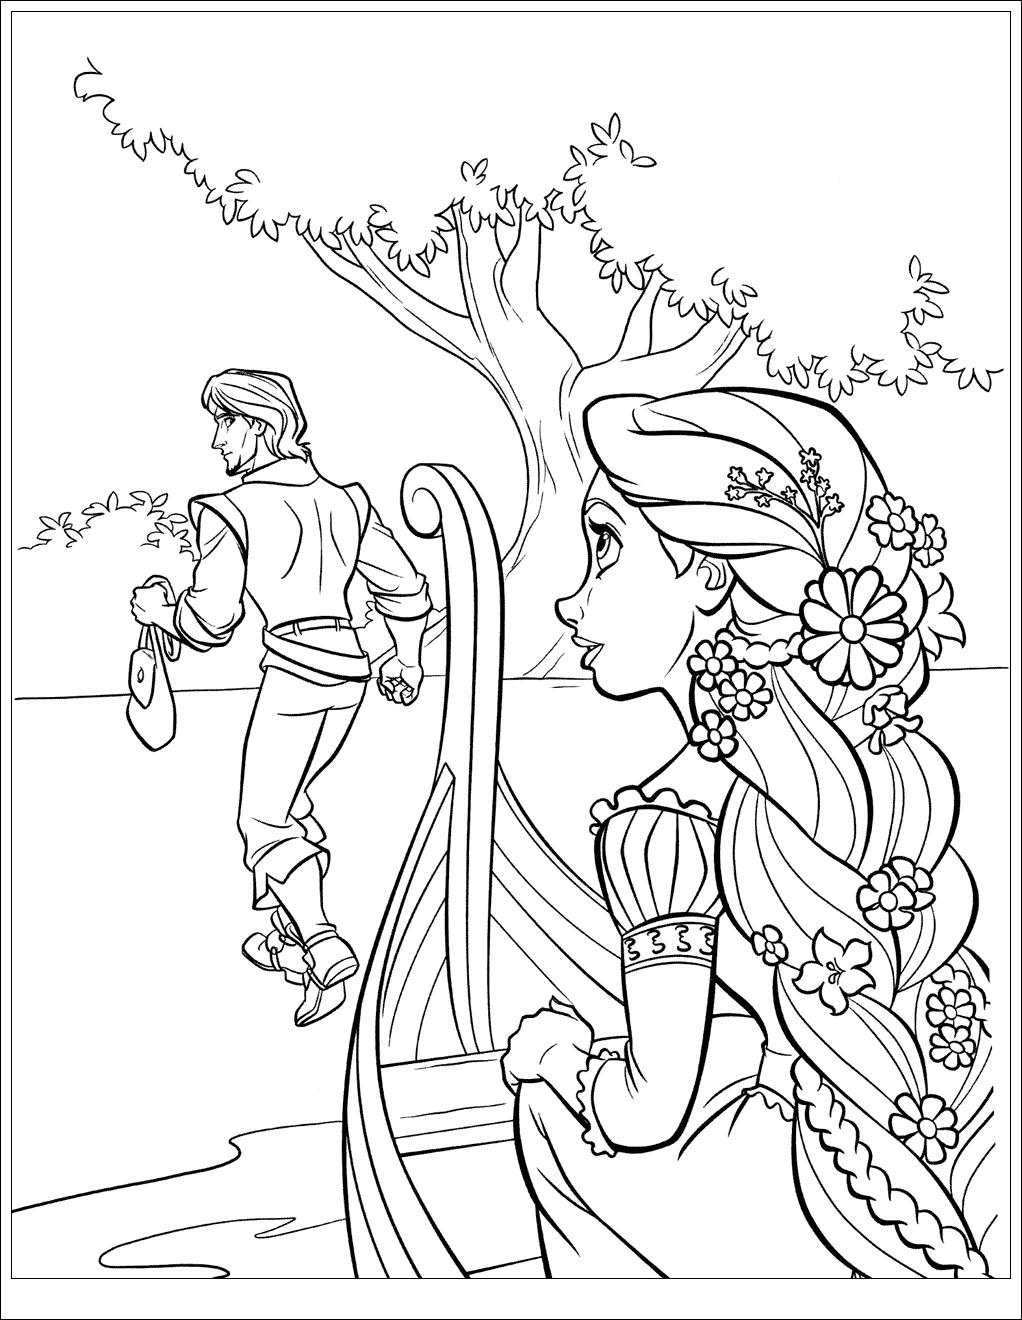 Tangled to color for children - Tangled Kids Coloring Pages